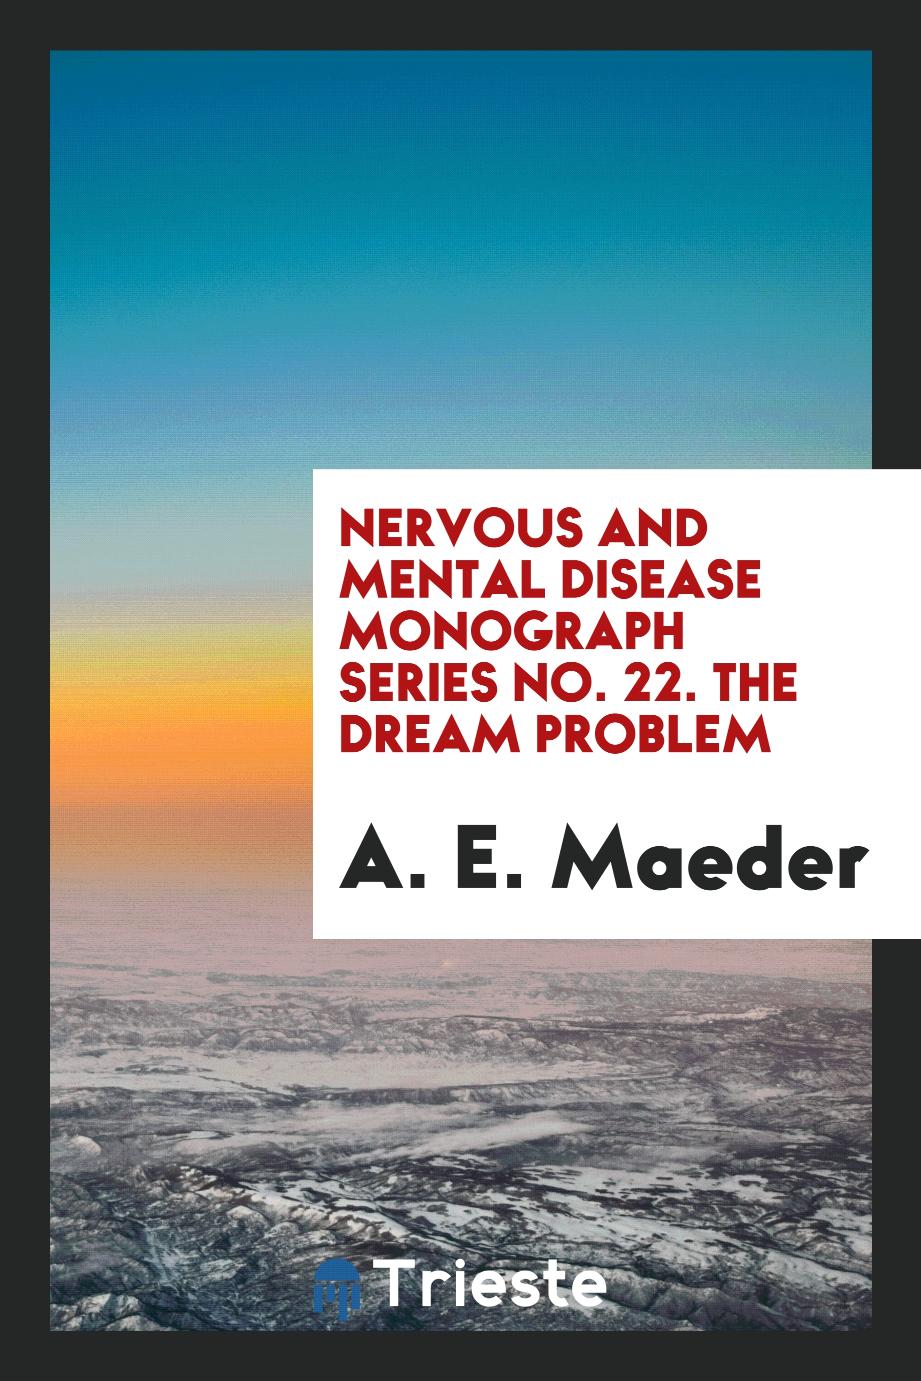 Nervous and Mental Disease Monograph Series No. 22. The Dream Problem